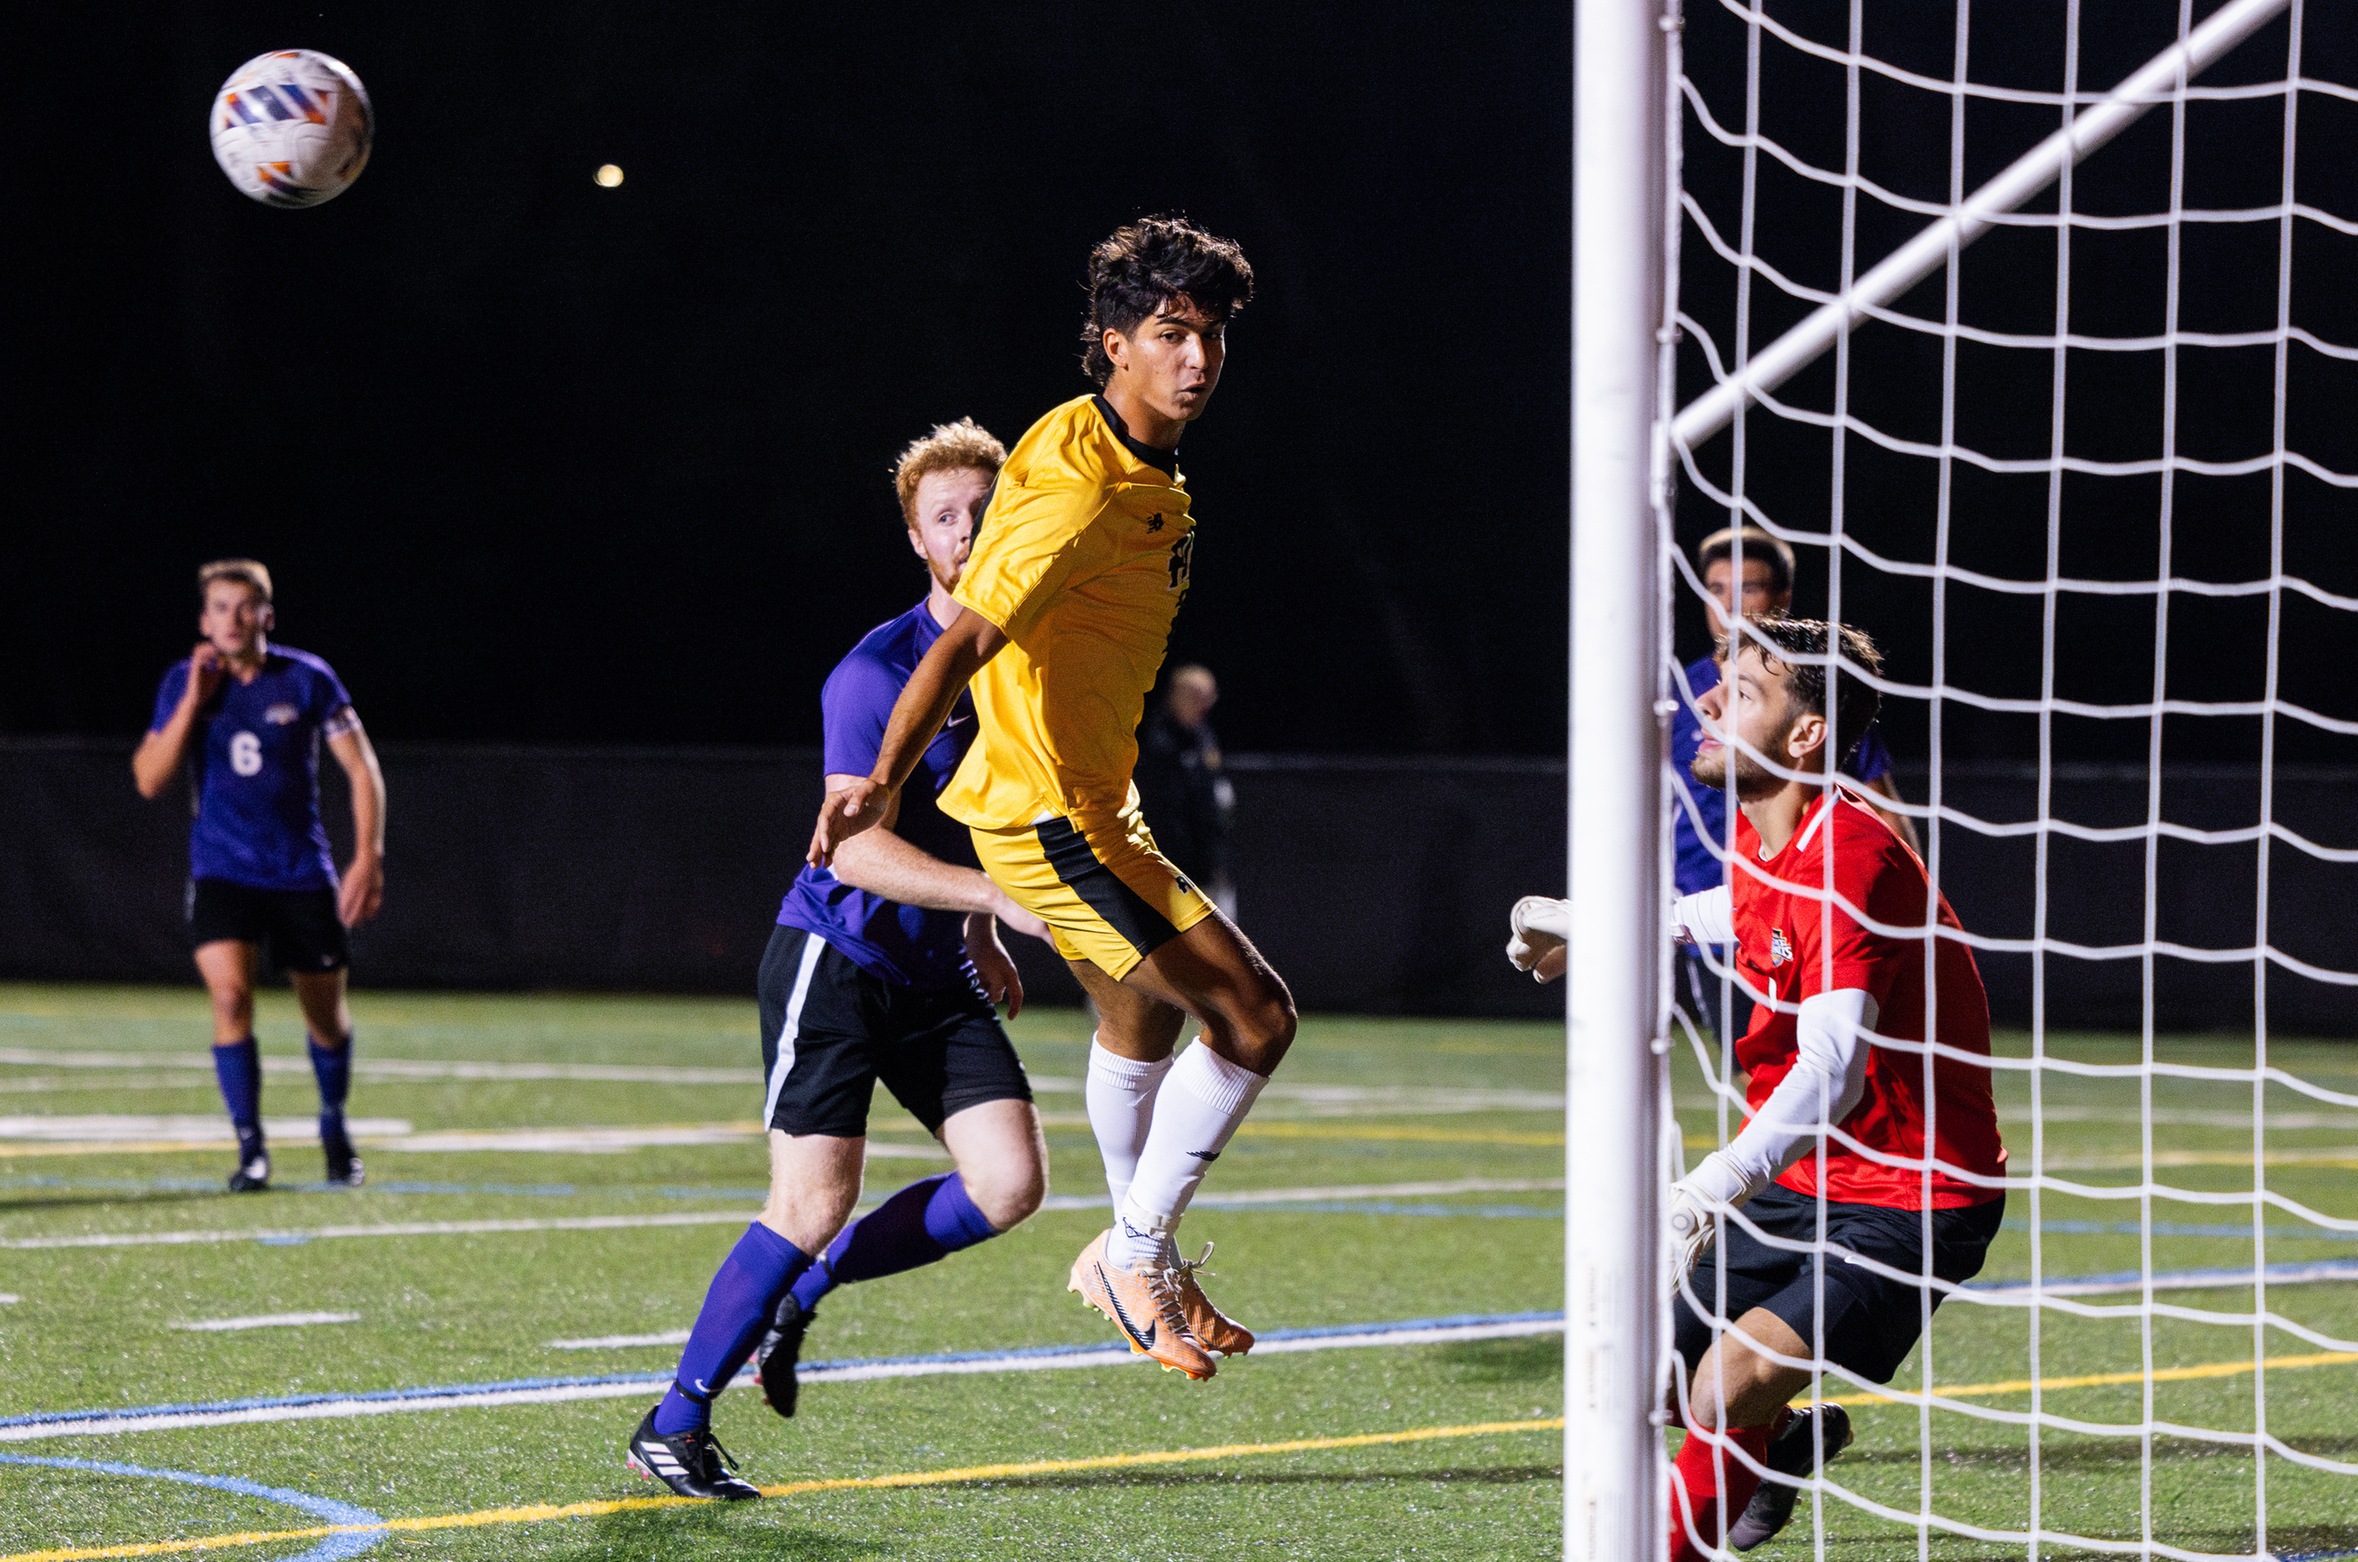 Taleb named NE10 Men's Soccer Rookie of the Year, four earn All-Conference